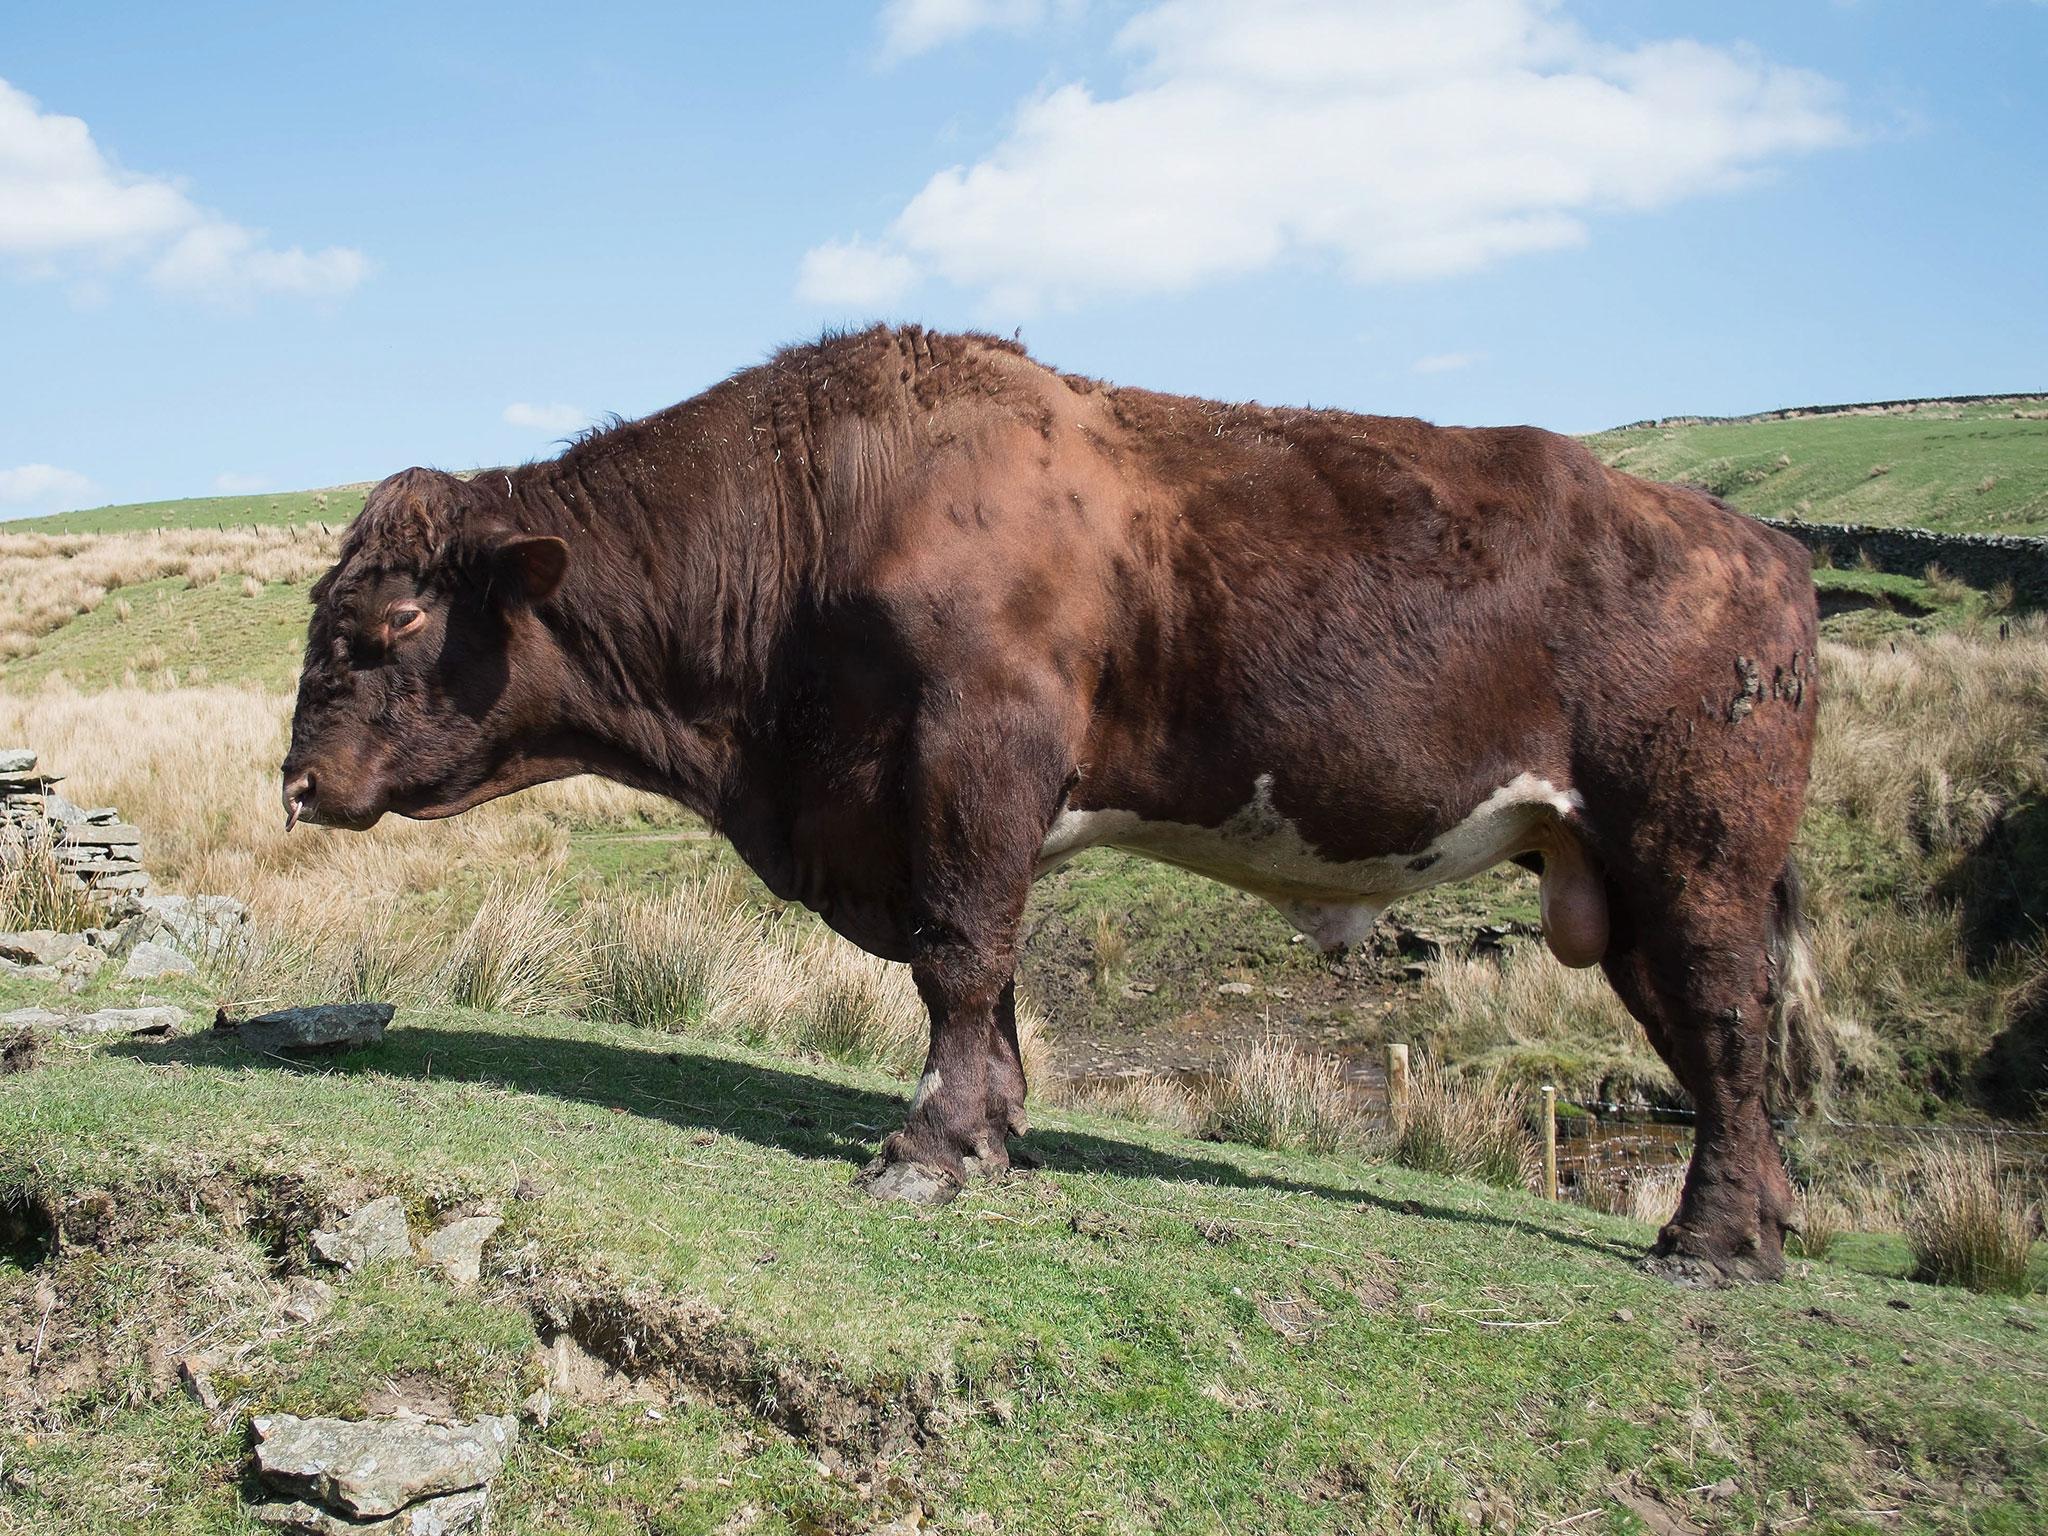 The bull was thought to have been 'over-enthusiastic' on his first days out